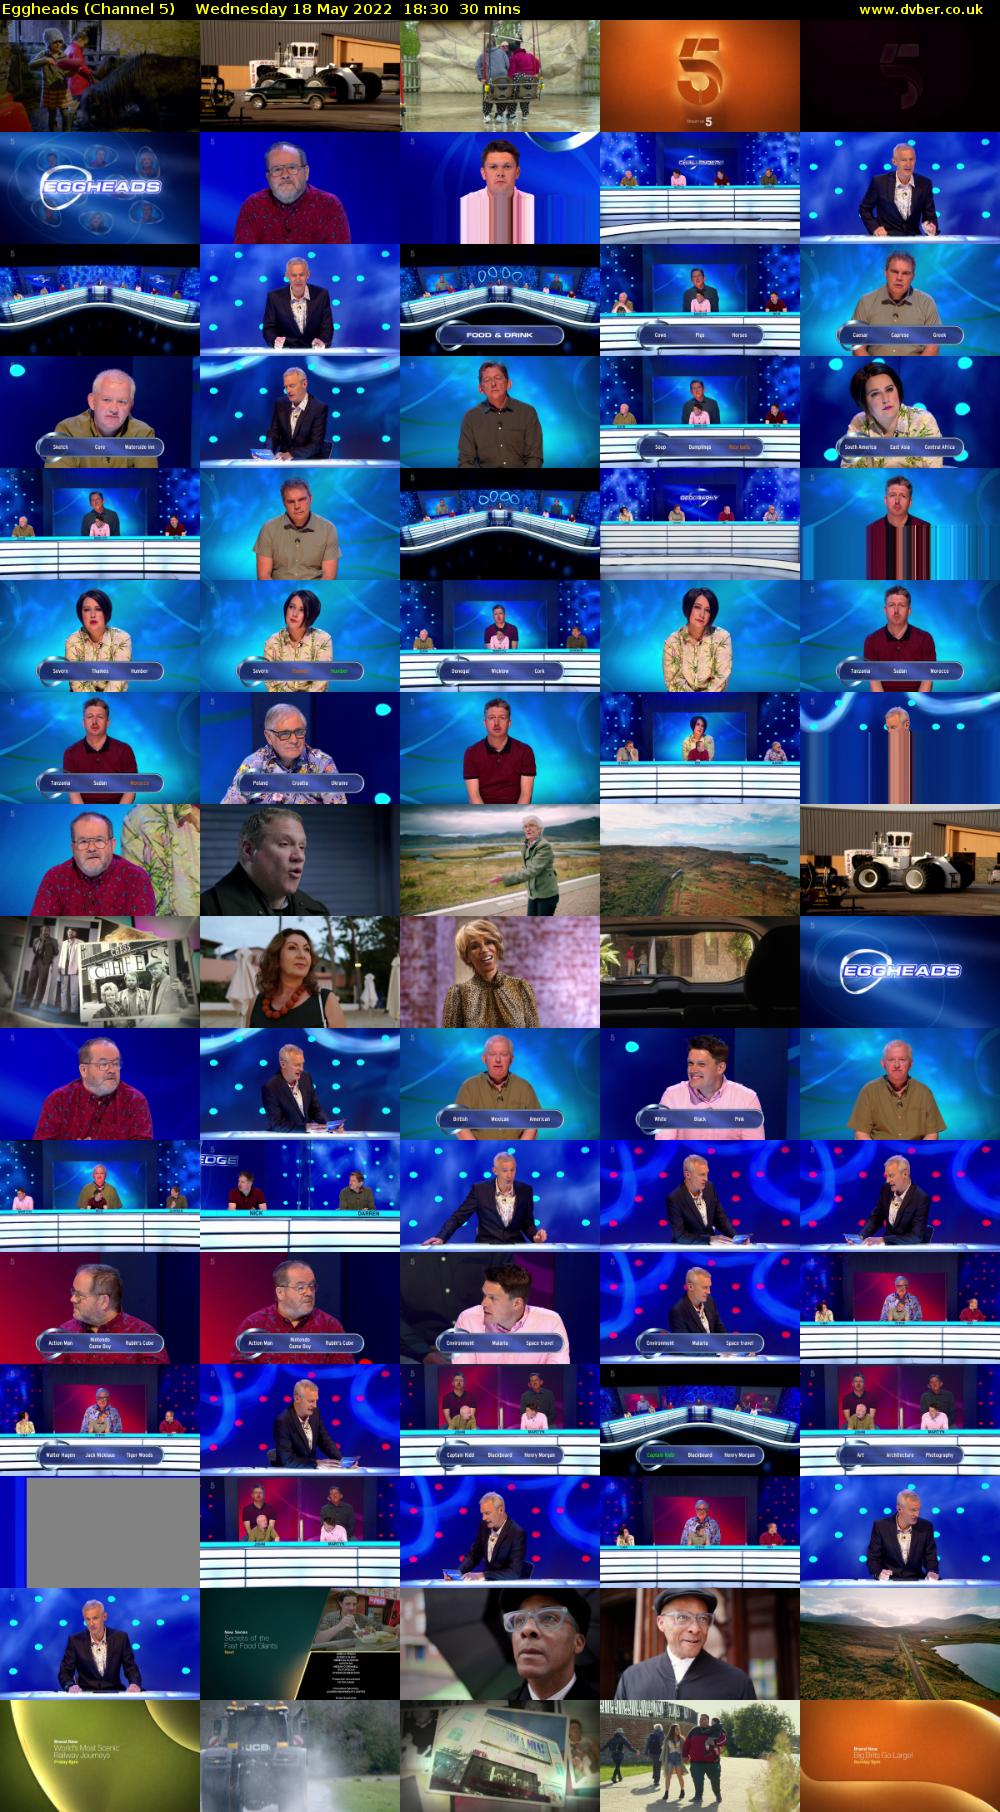 Eggheads (Channel 5) Wednesday 18 May 2022 18:30 - 19:00